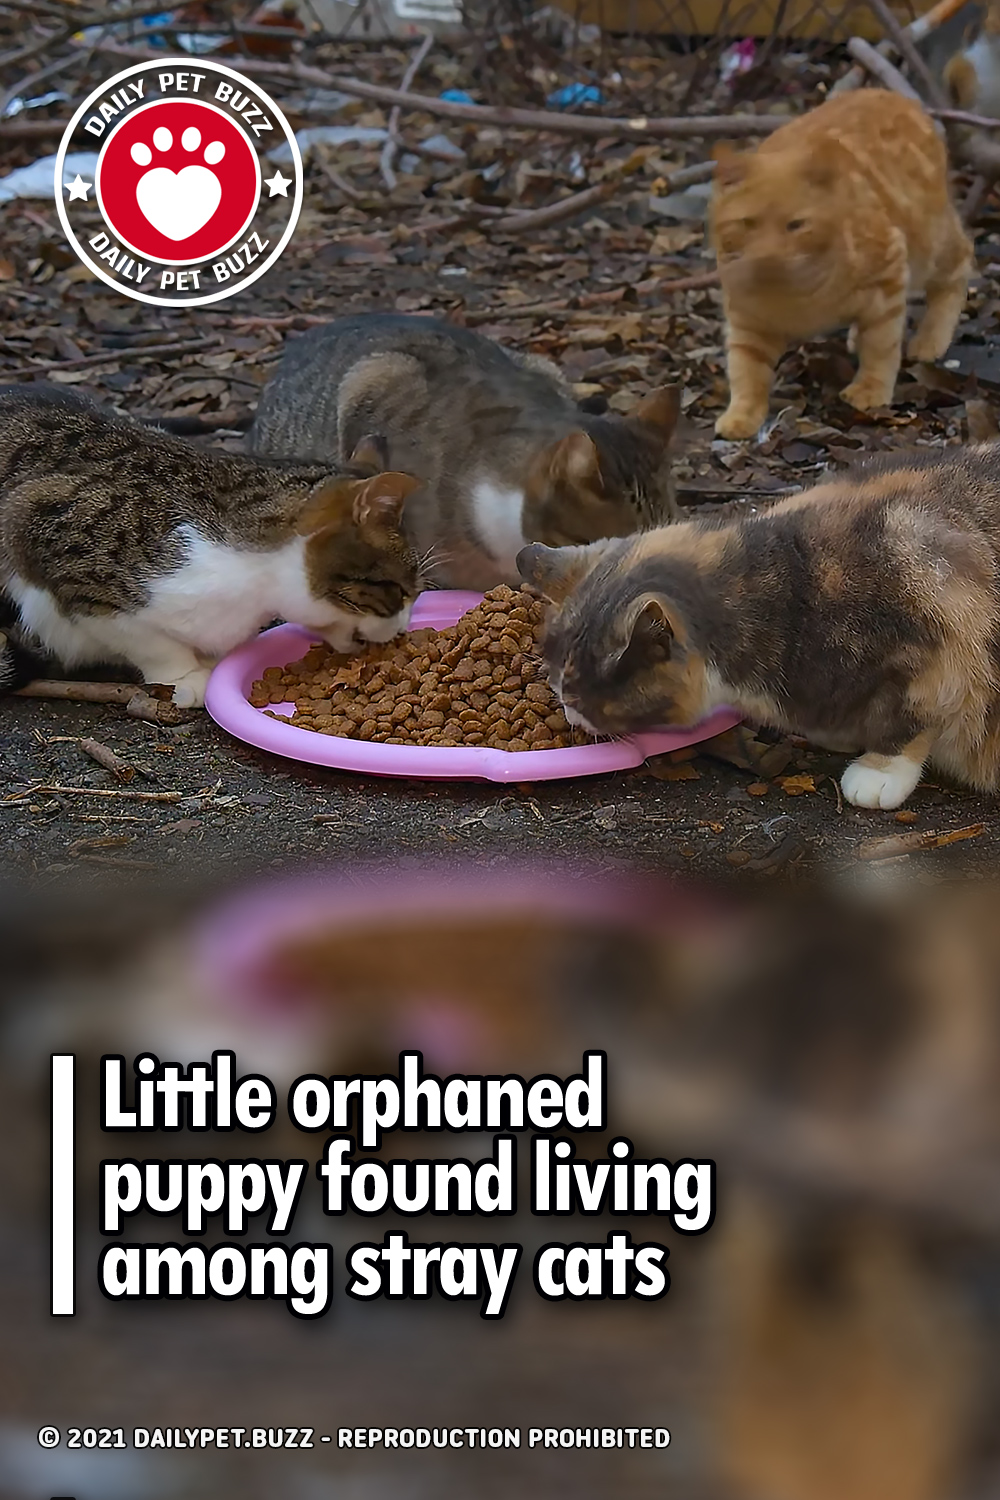 Little orphaned puppy found living among stray cats